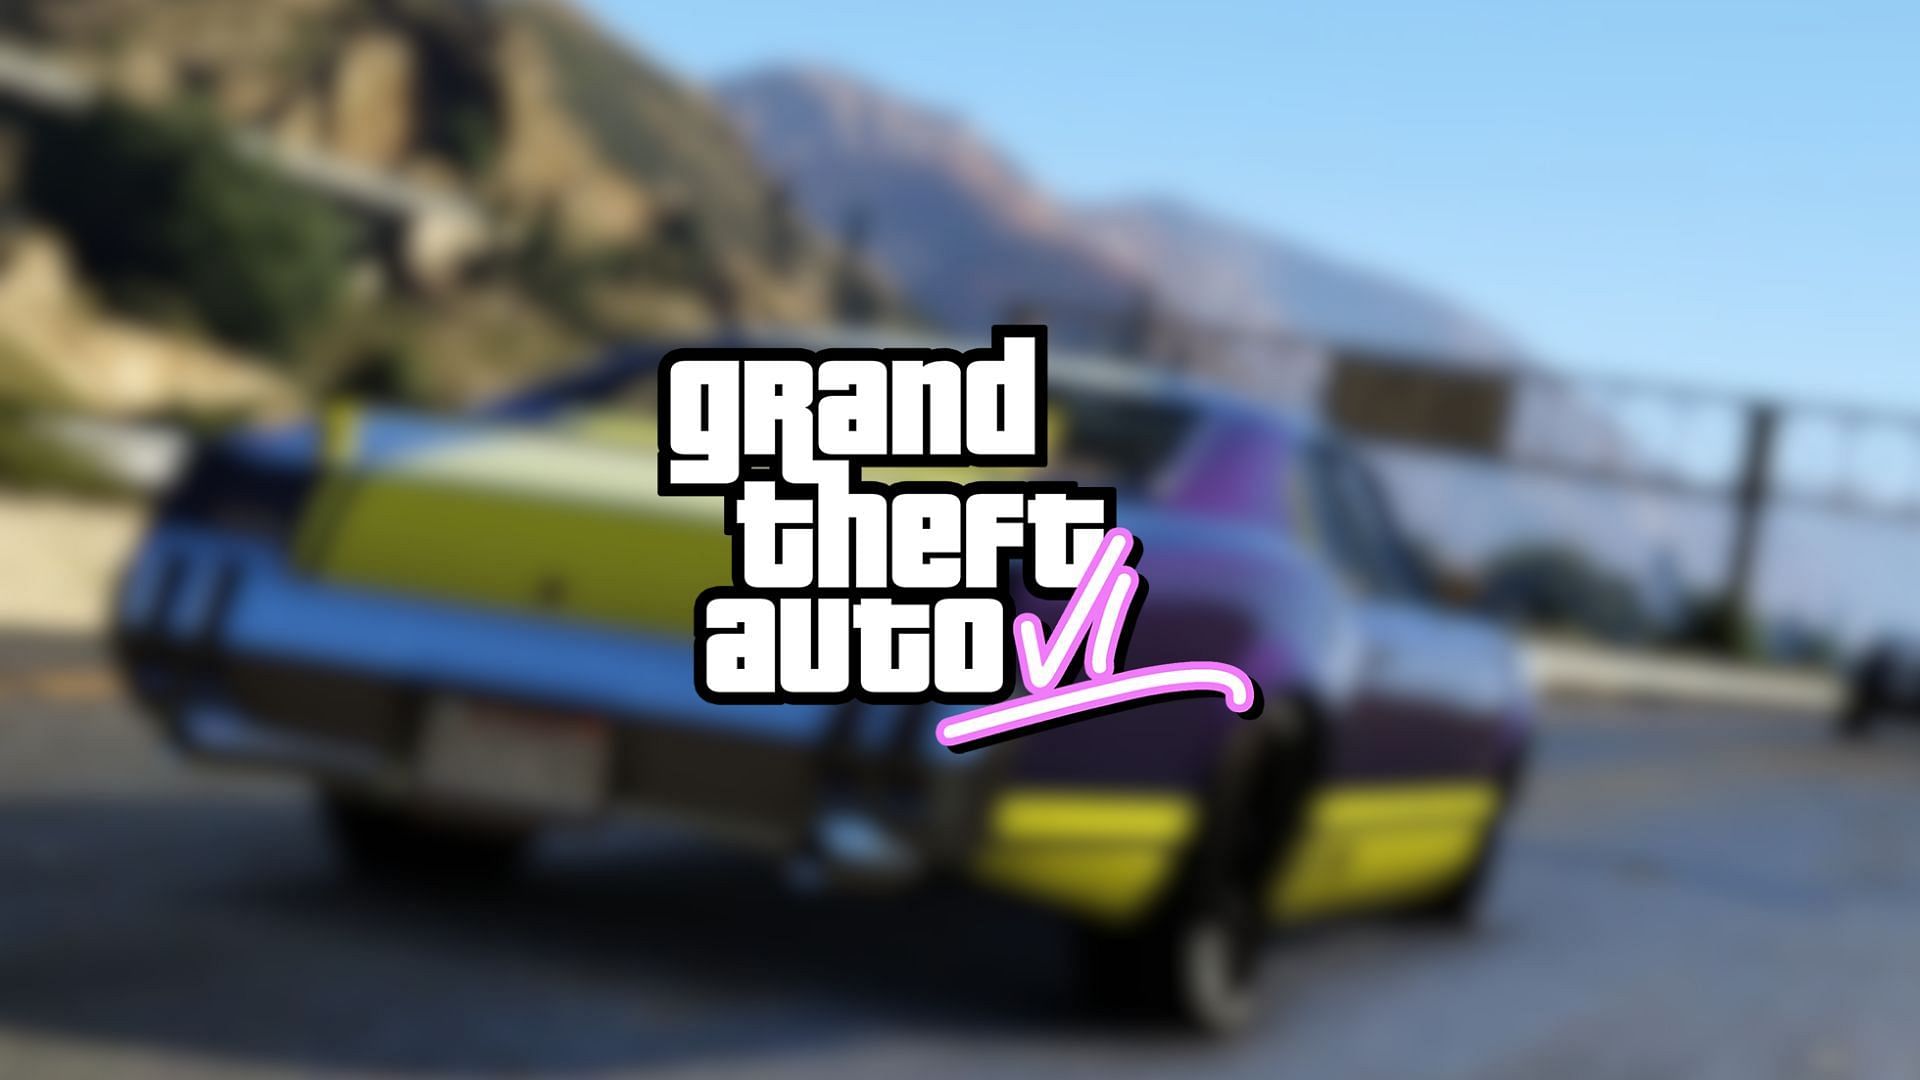 Top 5 features GTA 6 should include from previous GTA games